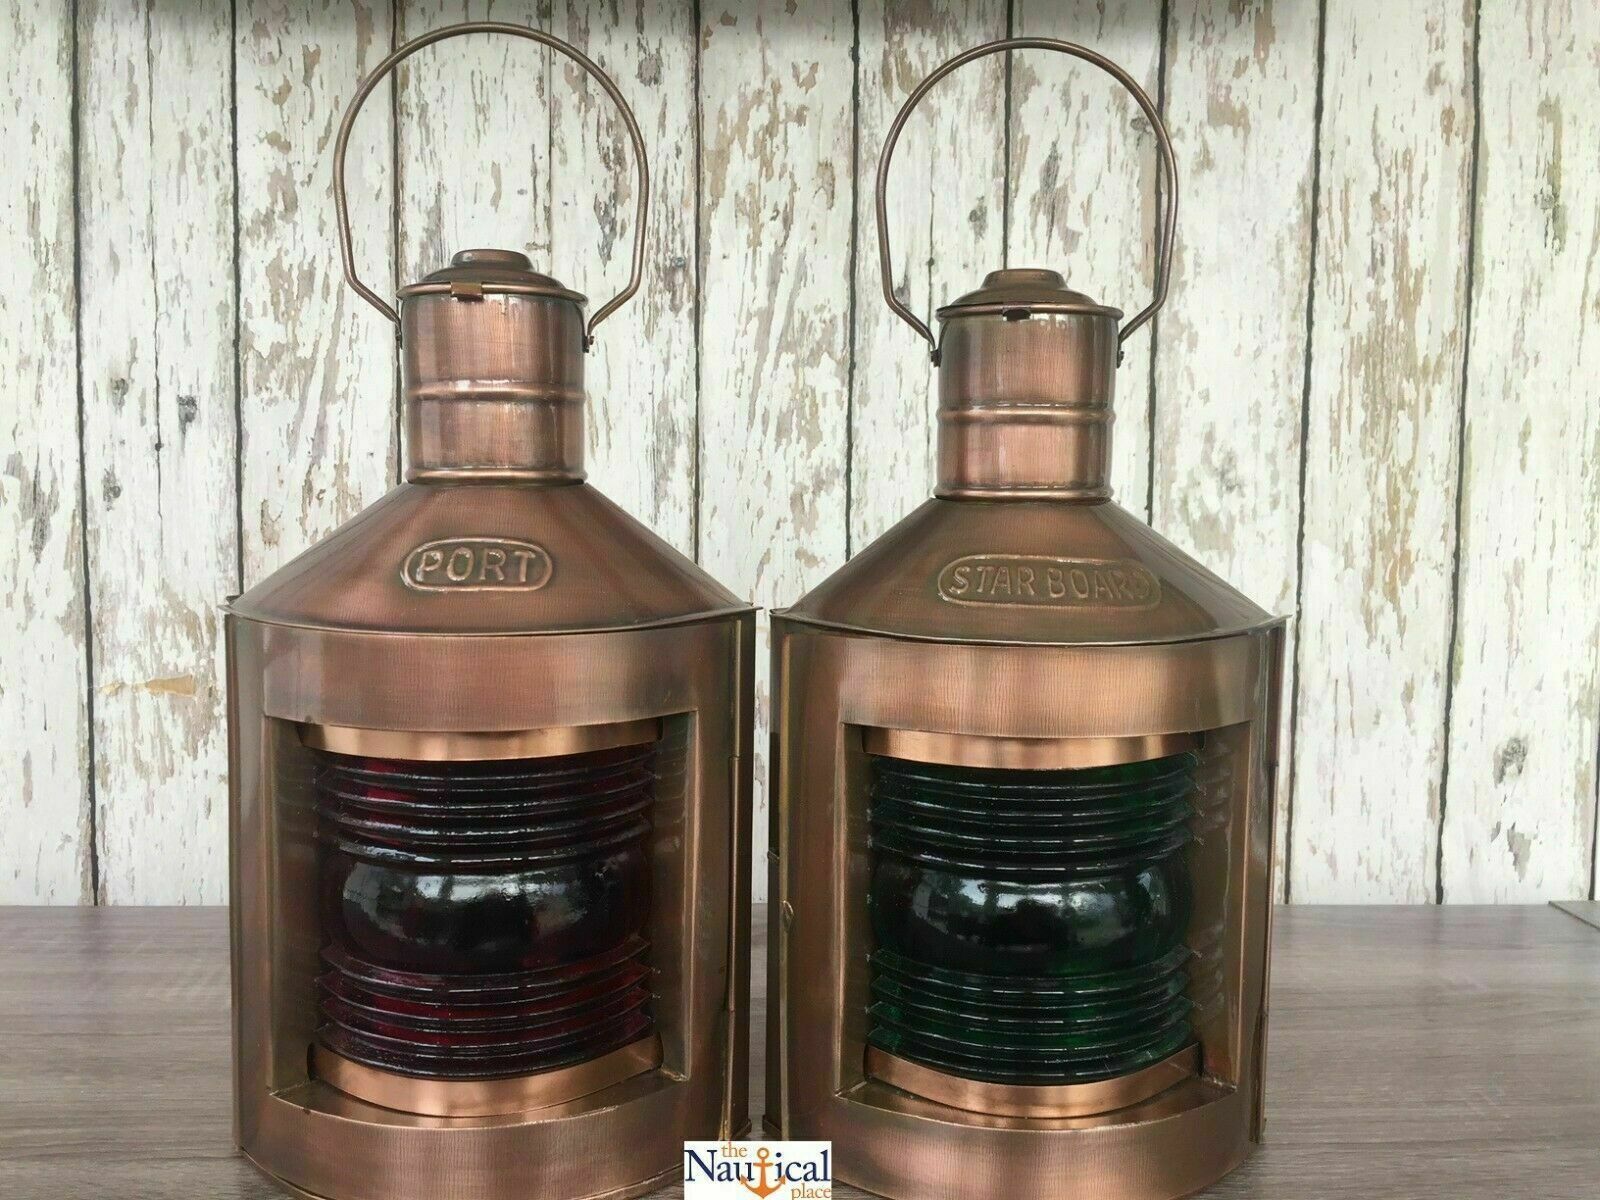 Pair Of Nautical Lantern Port And Starboard handmade Oil Lantern Made From Metal Без бренда